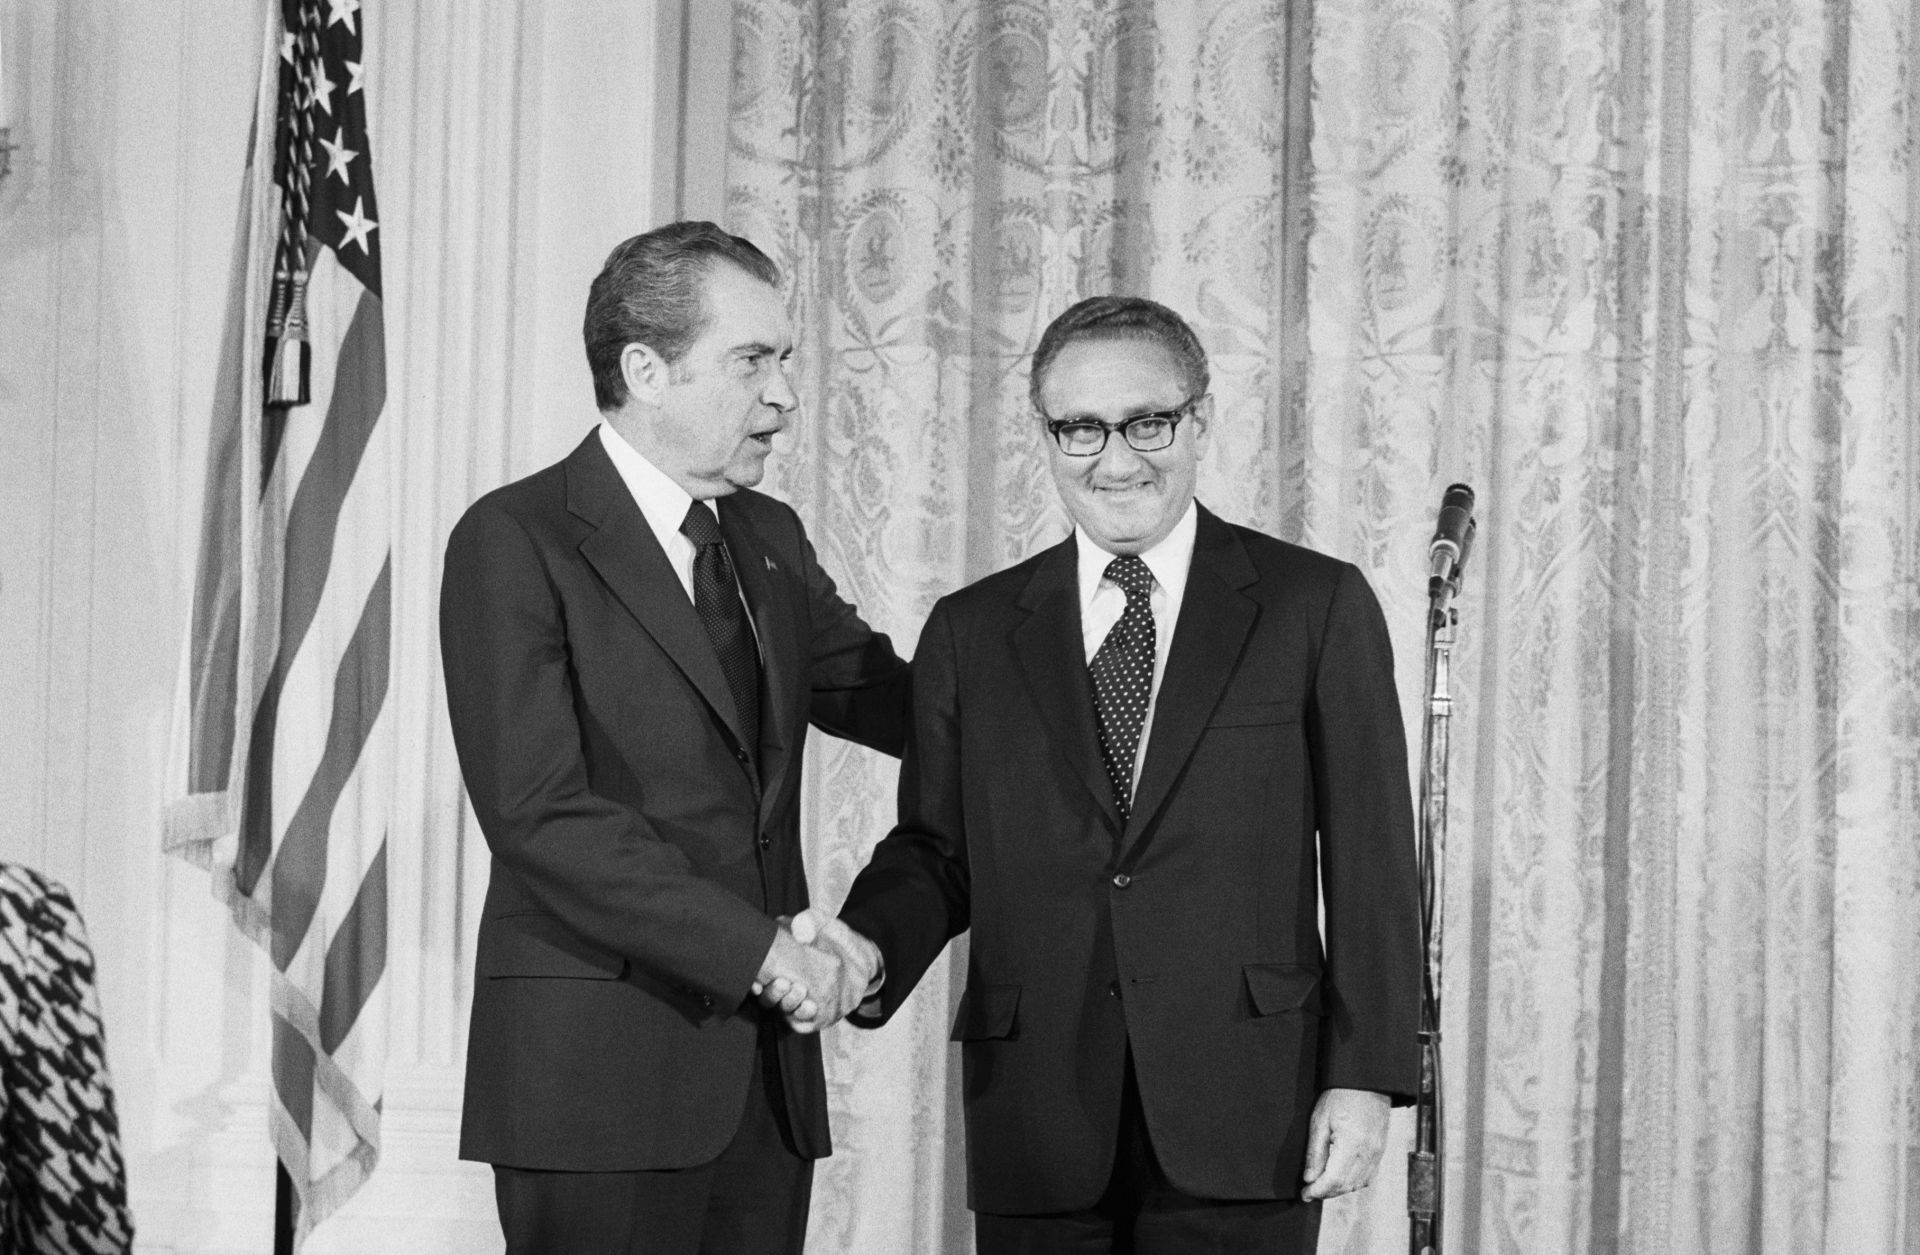 Then-U.S. President Richard Nixon (left) congratulates Henry Kissinger after he was sworn in as Secretary of State in the East Room of the White House on Sept. 22, 1973.